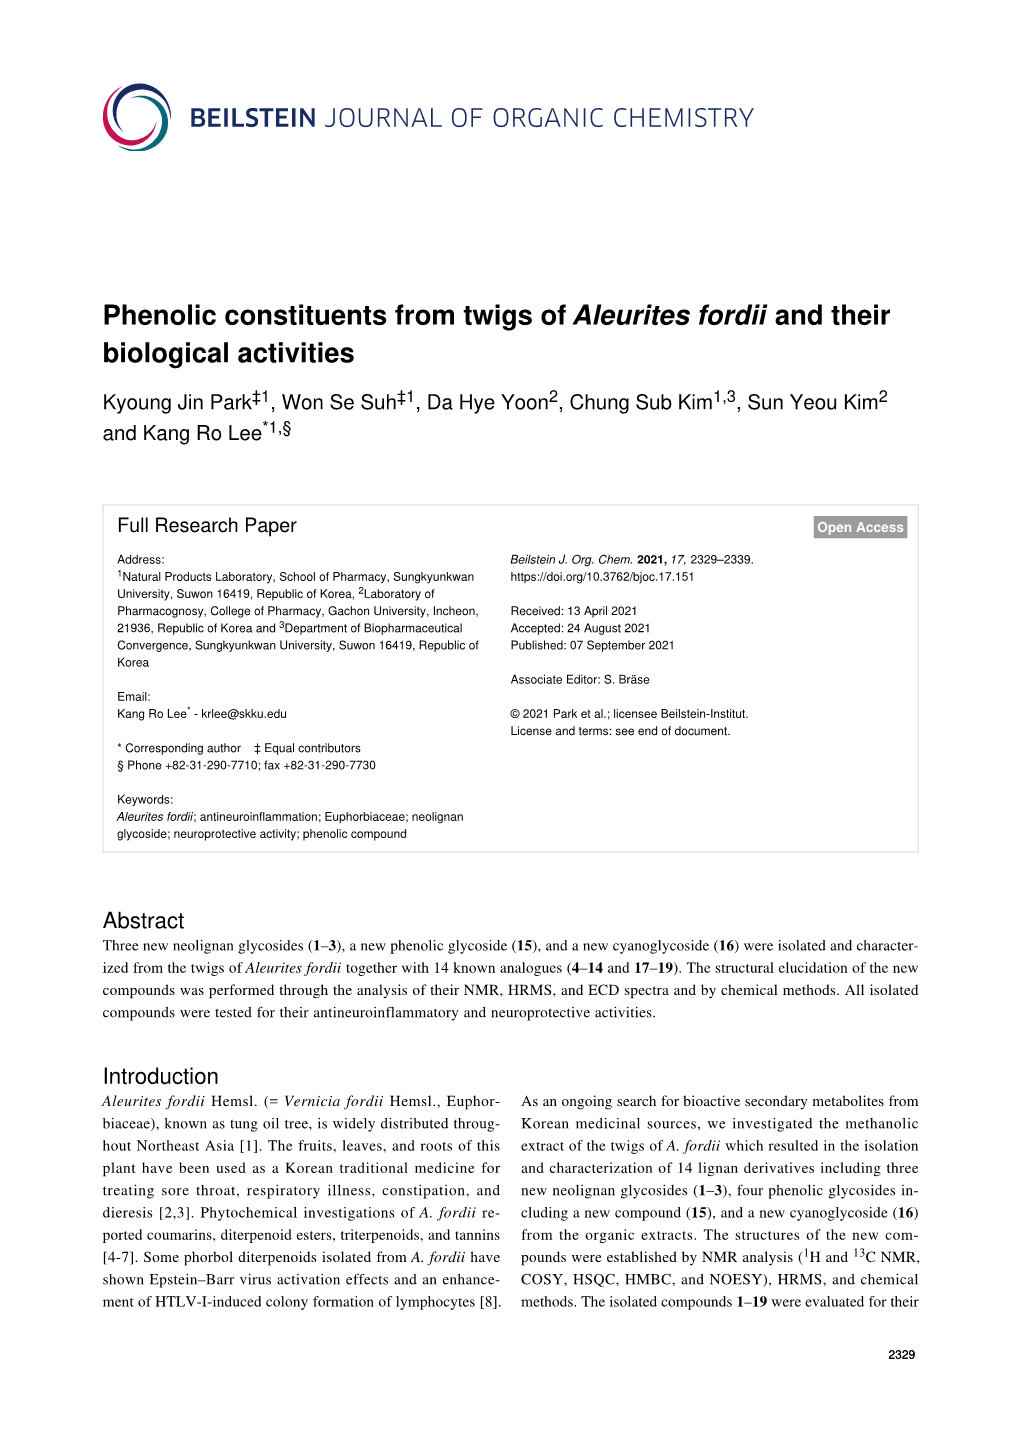 Phenolic Constituents from Twigs of Aleurites Fordii and Their Biological Activities